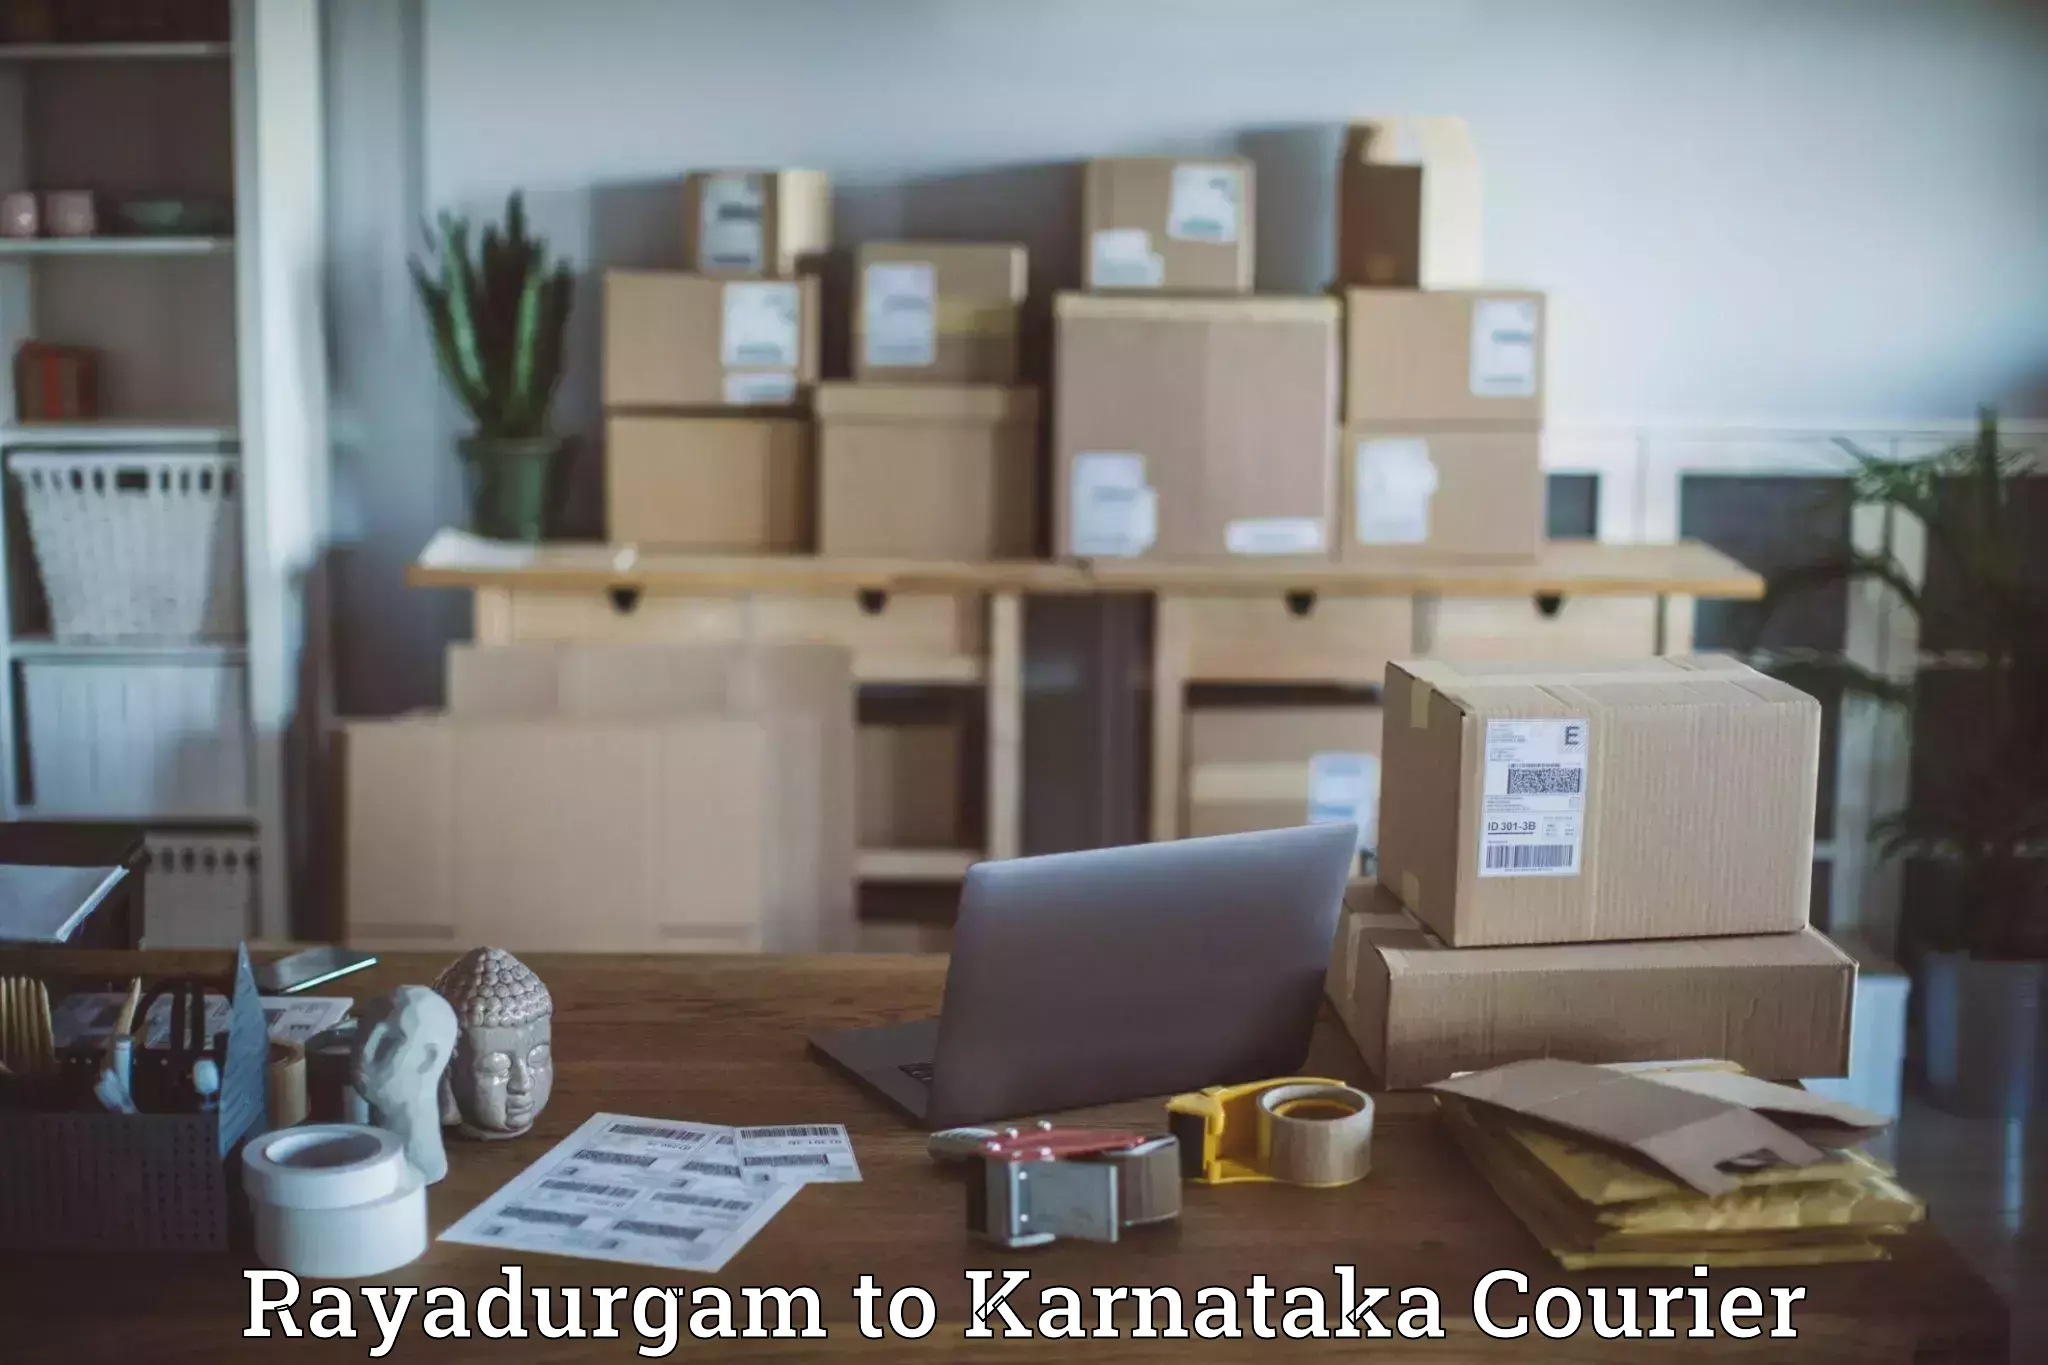 Advanced tracking systems Rayadurgam to Surathkal